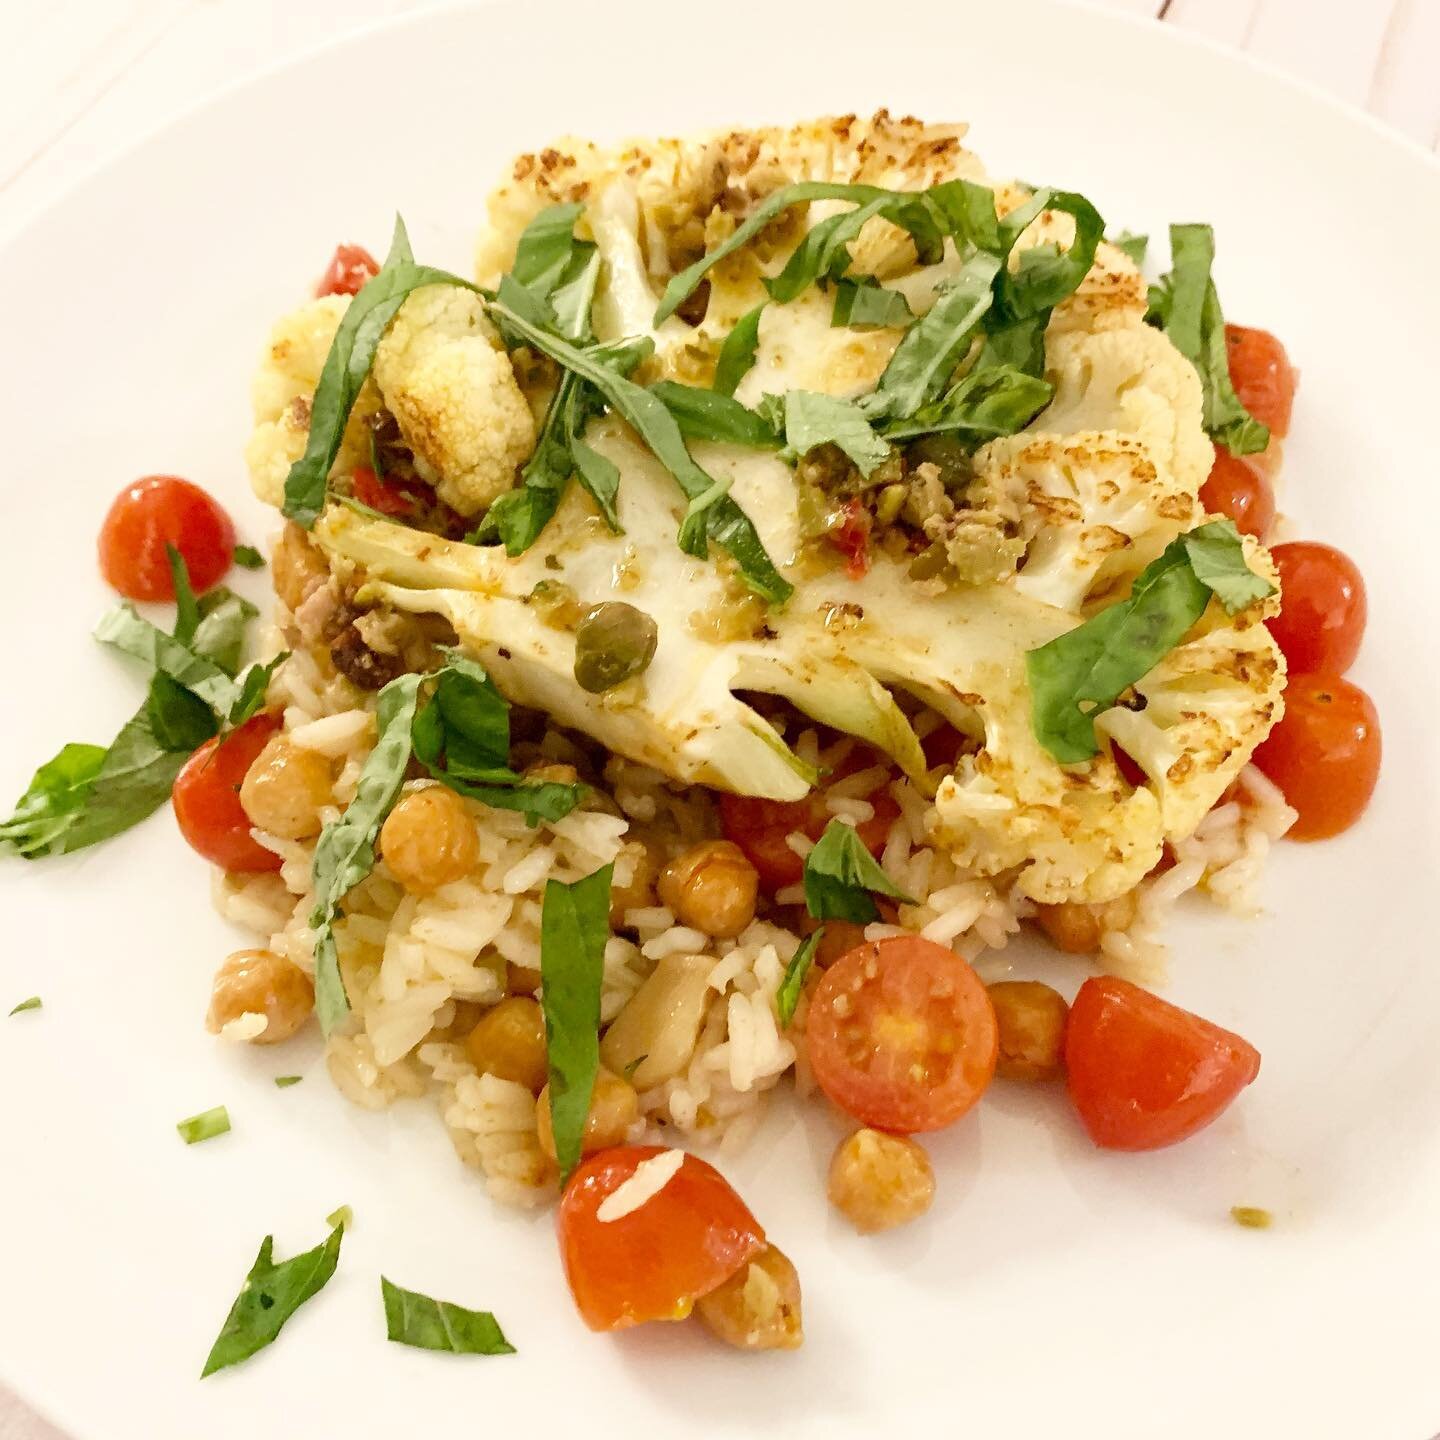 loaded cauliflower steak! The tastes of summer are getting closer! This cauliflower steak sits on a bed of basmati rice with olive tapenade, roasted tomatoes, chickpeas, and basil. 😀👌 #eatsbylulu 
- you can find the recipe under the &ldquo;recipe t